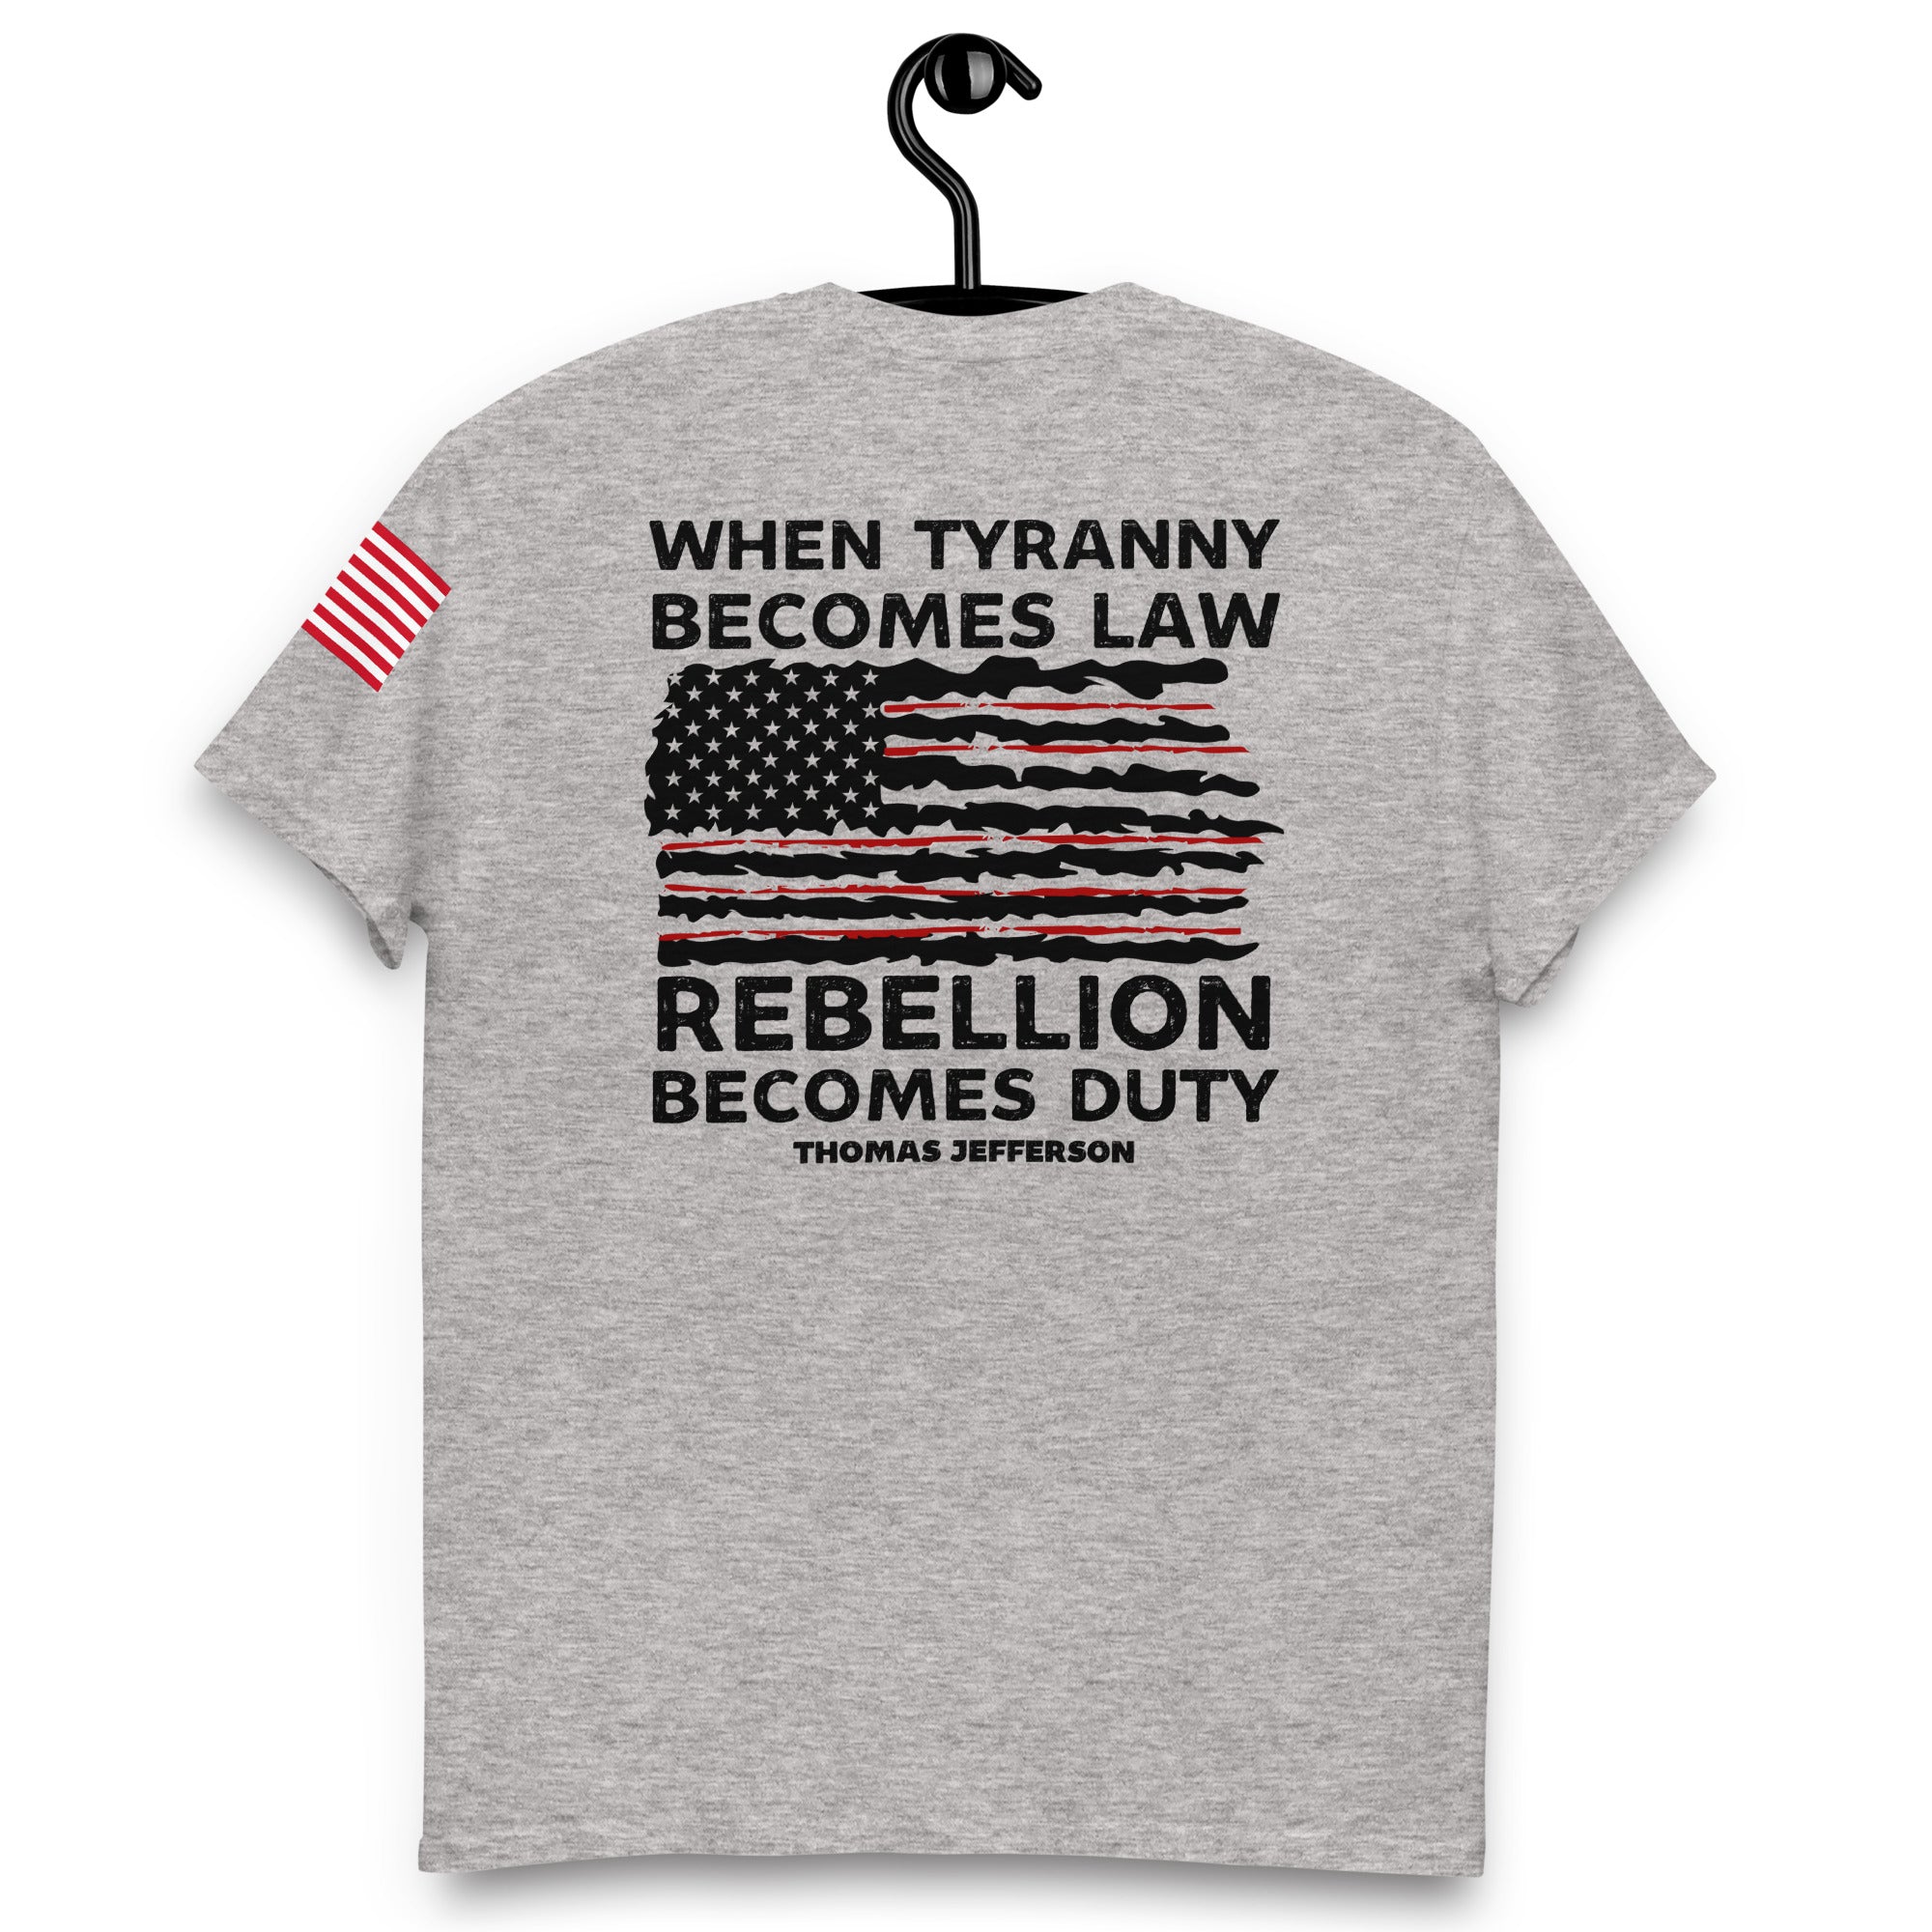 When Tyranny Becomes Law Rebellion Becomes Duty, American Patriot Shirt, Thomas Jefferson Tee, Political Shirts, 4th of July Patriotic Shirt